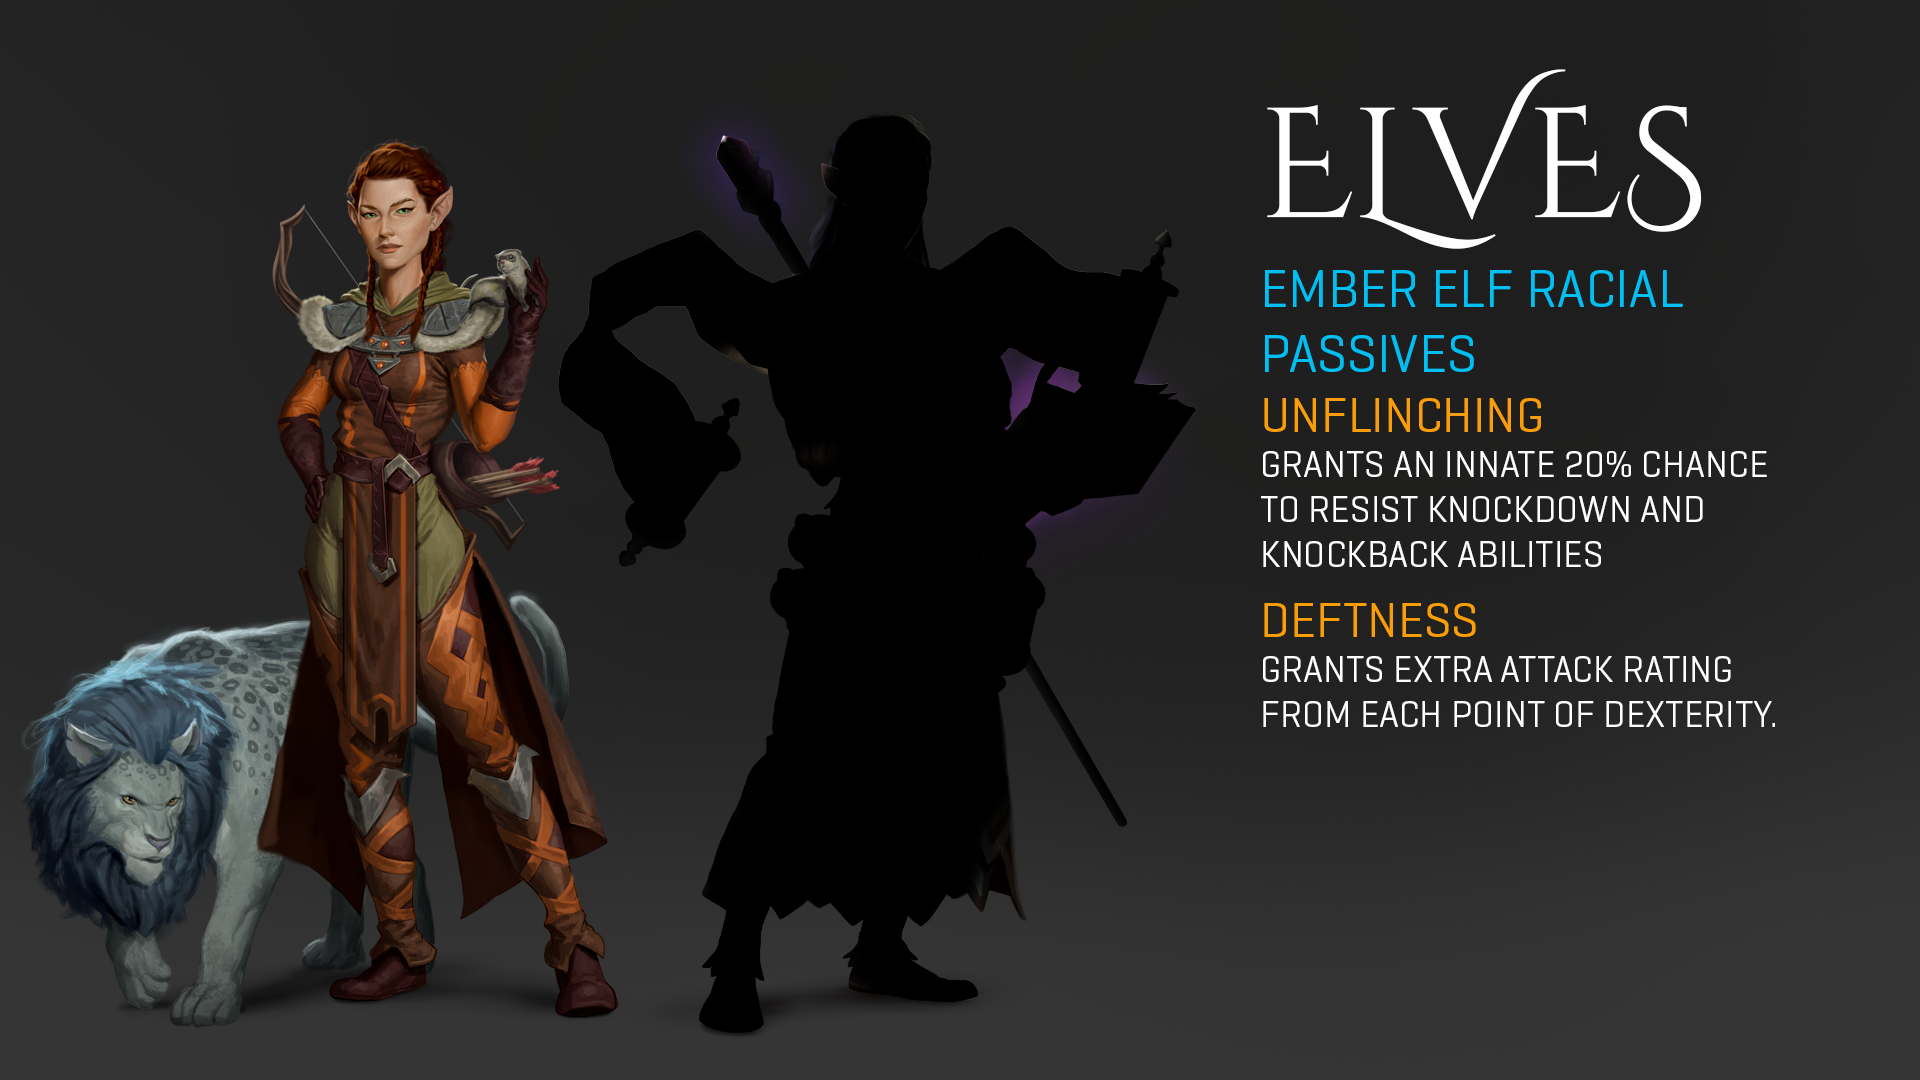 2019-Oct 30: Ember Elf racial passives listed with concept art